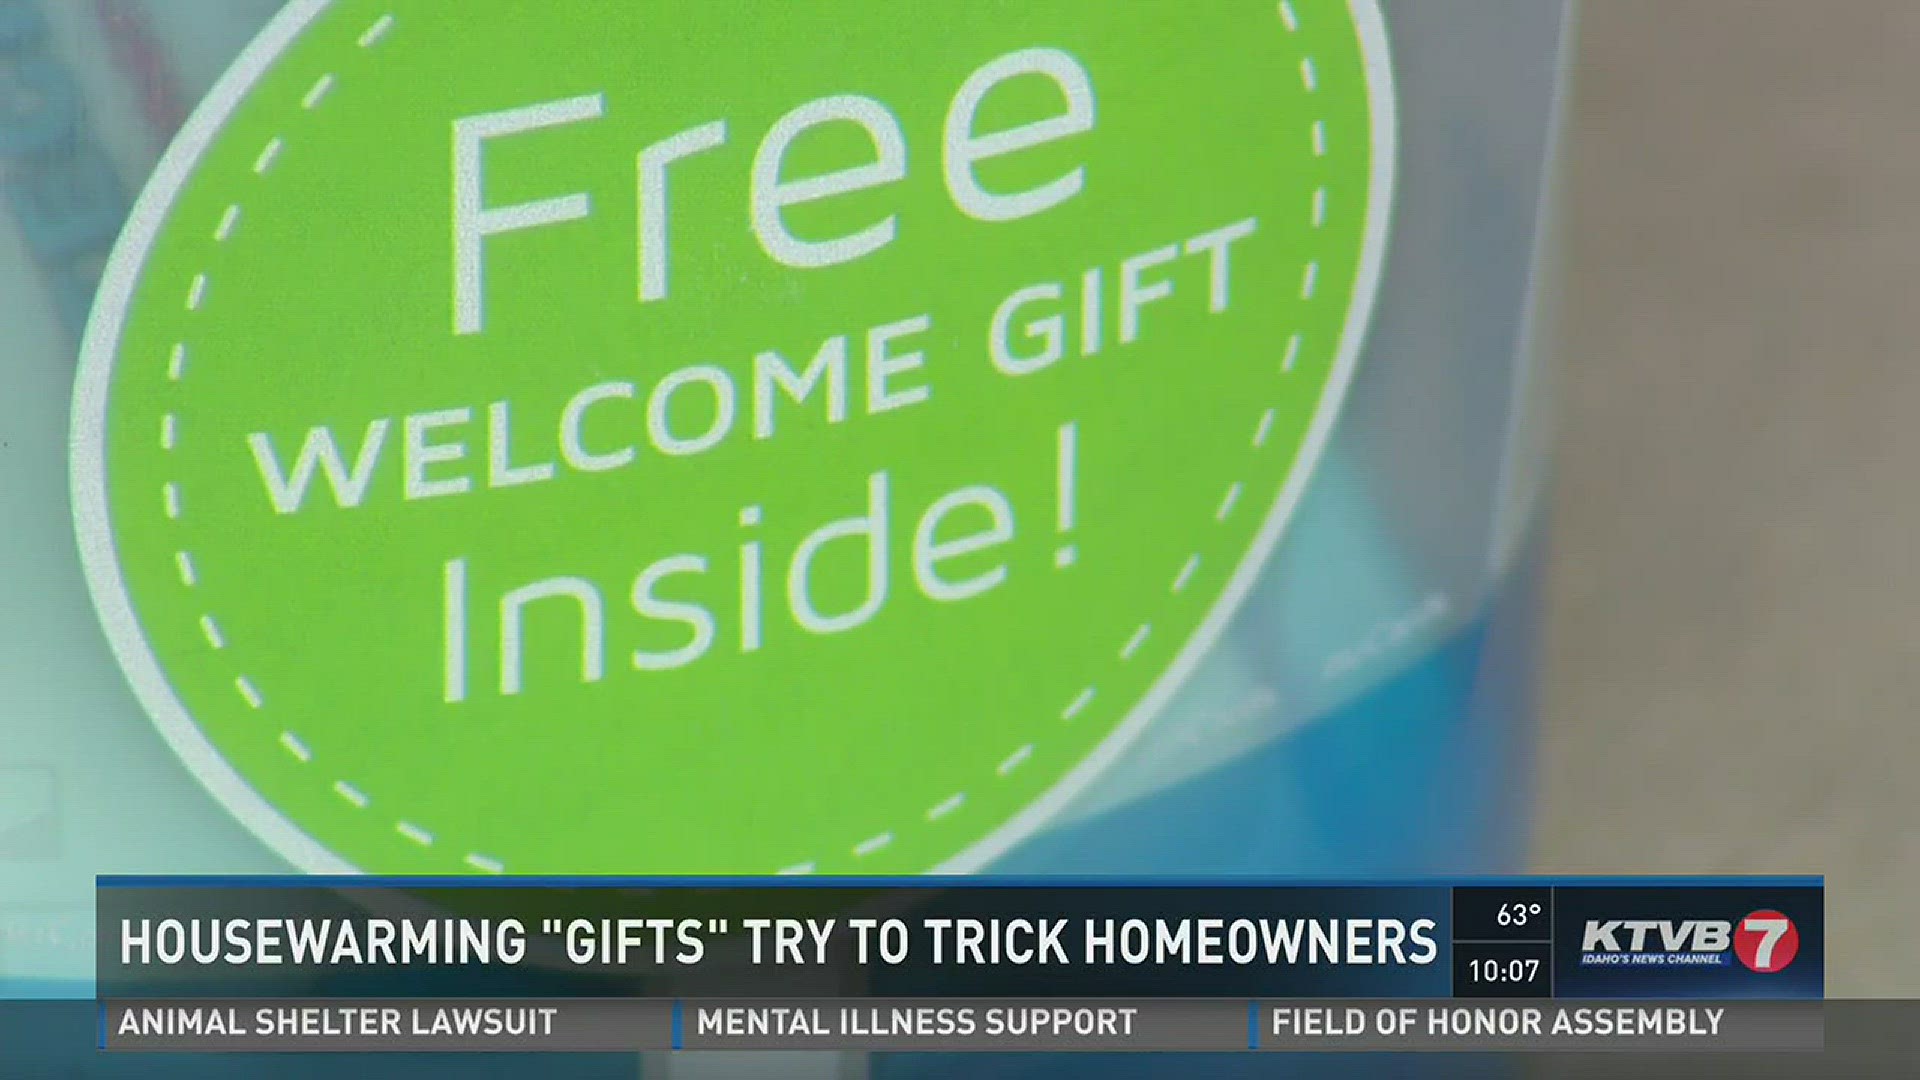 Housewarming "gifts" try to trick homeowners.